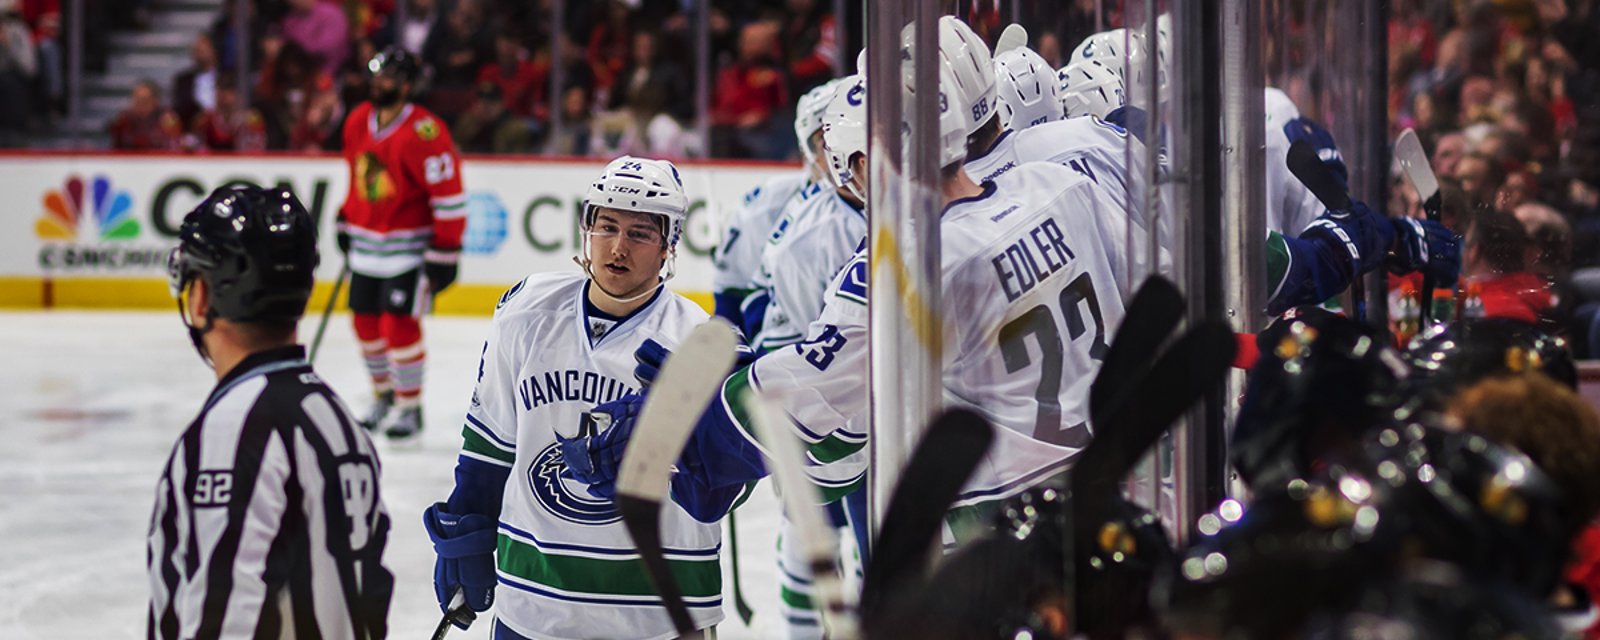 Breaking: Canucks place young forward on waivers